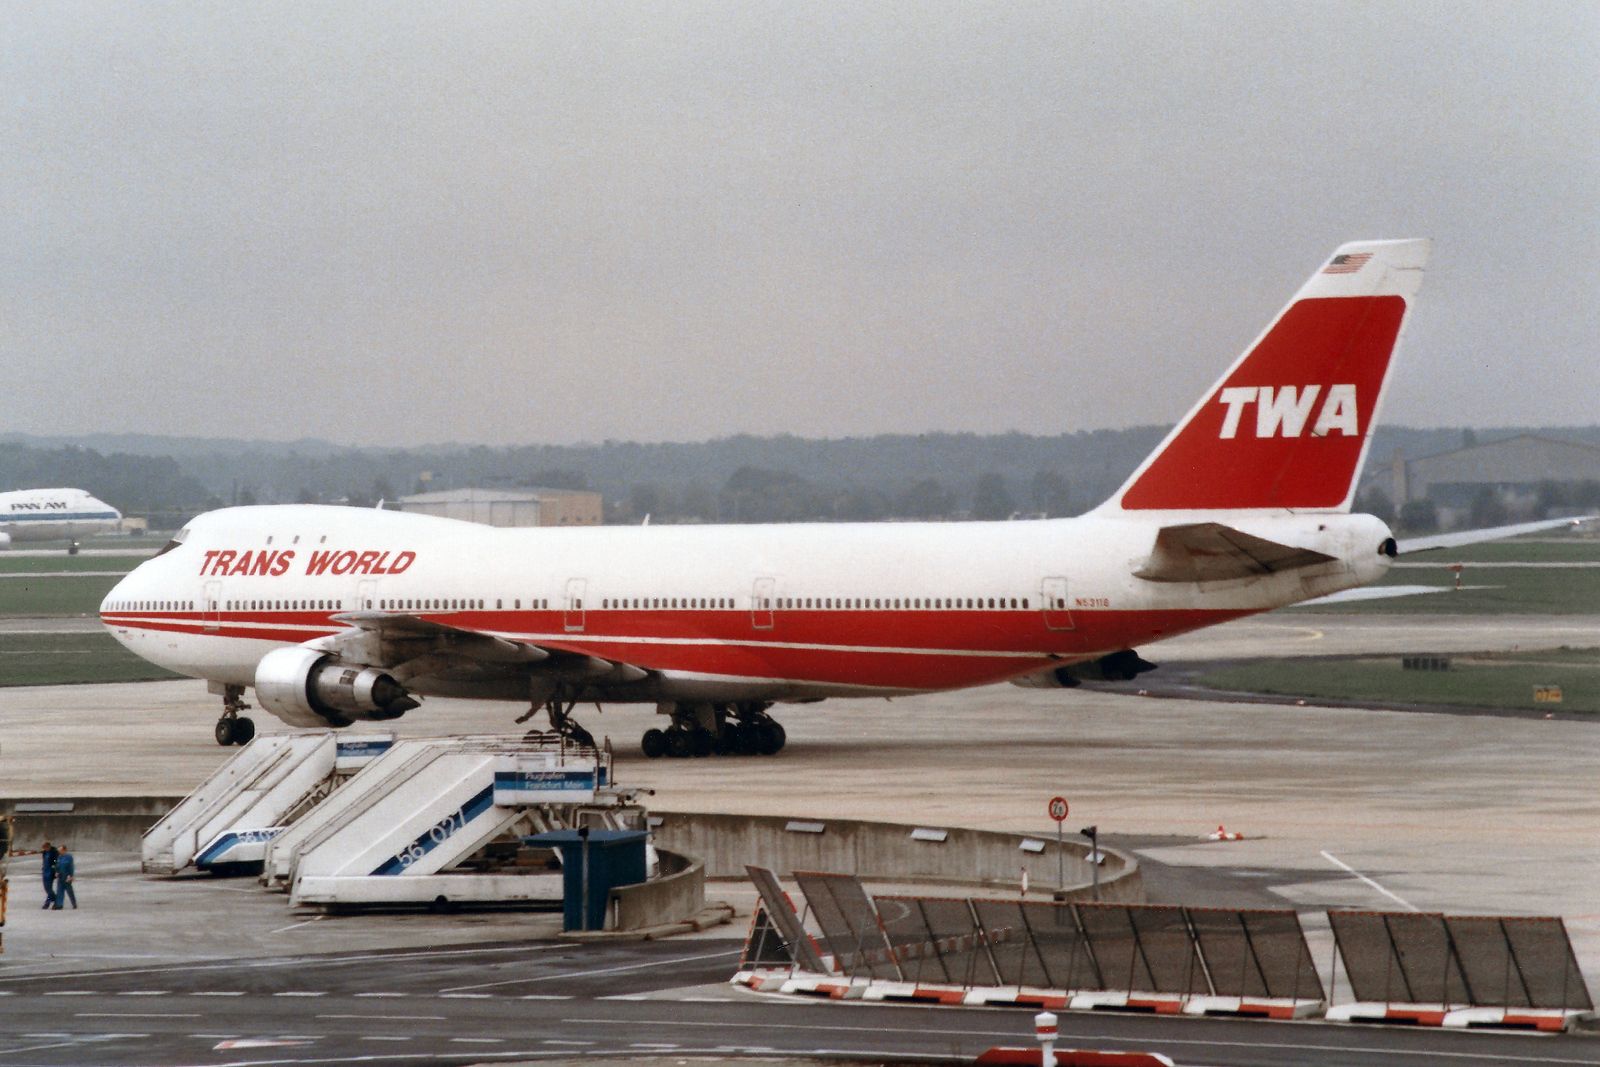 A Trans World Airlines TWA Boeing 747-100 on an airport apron.